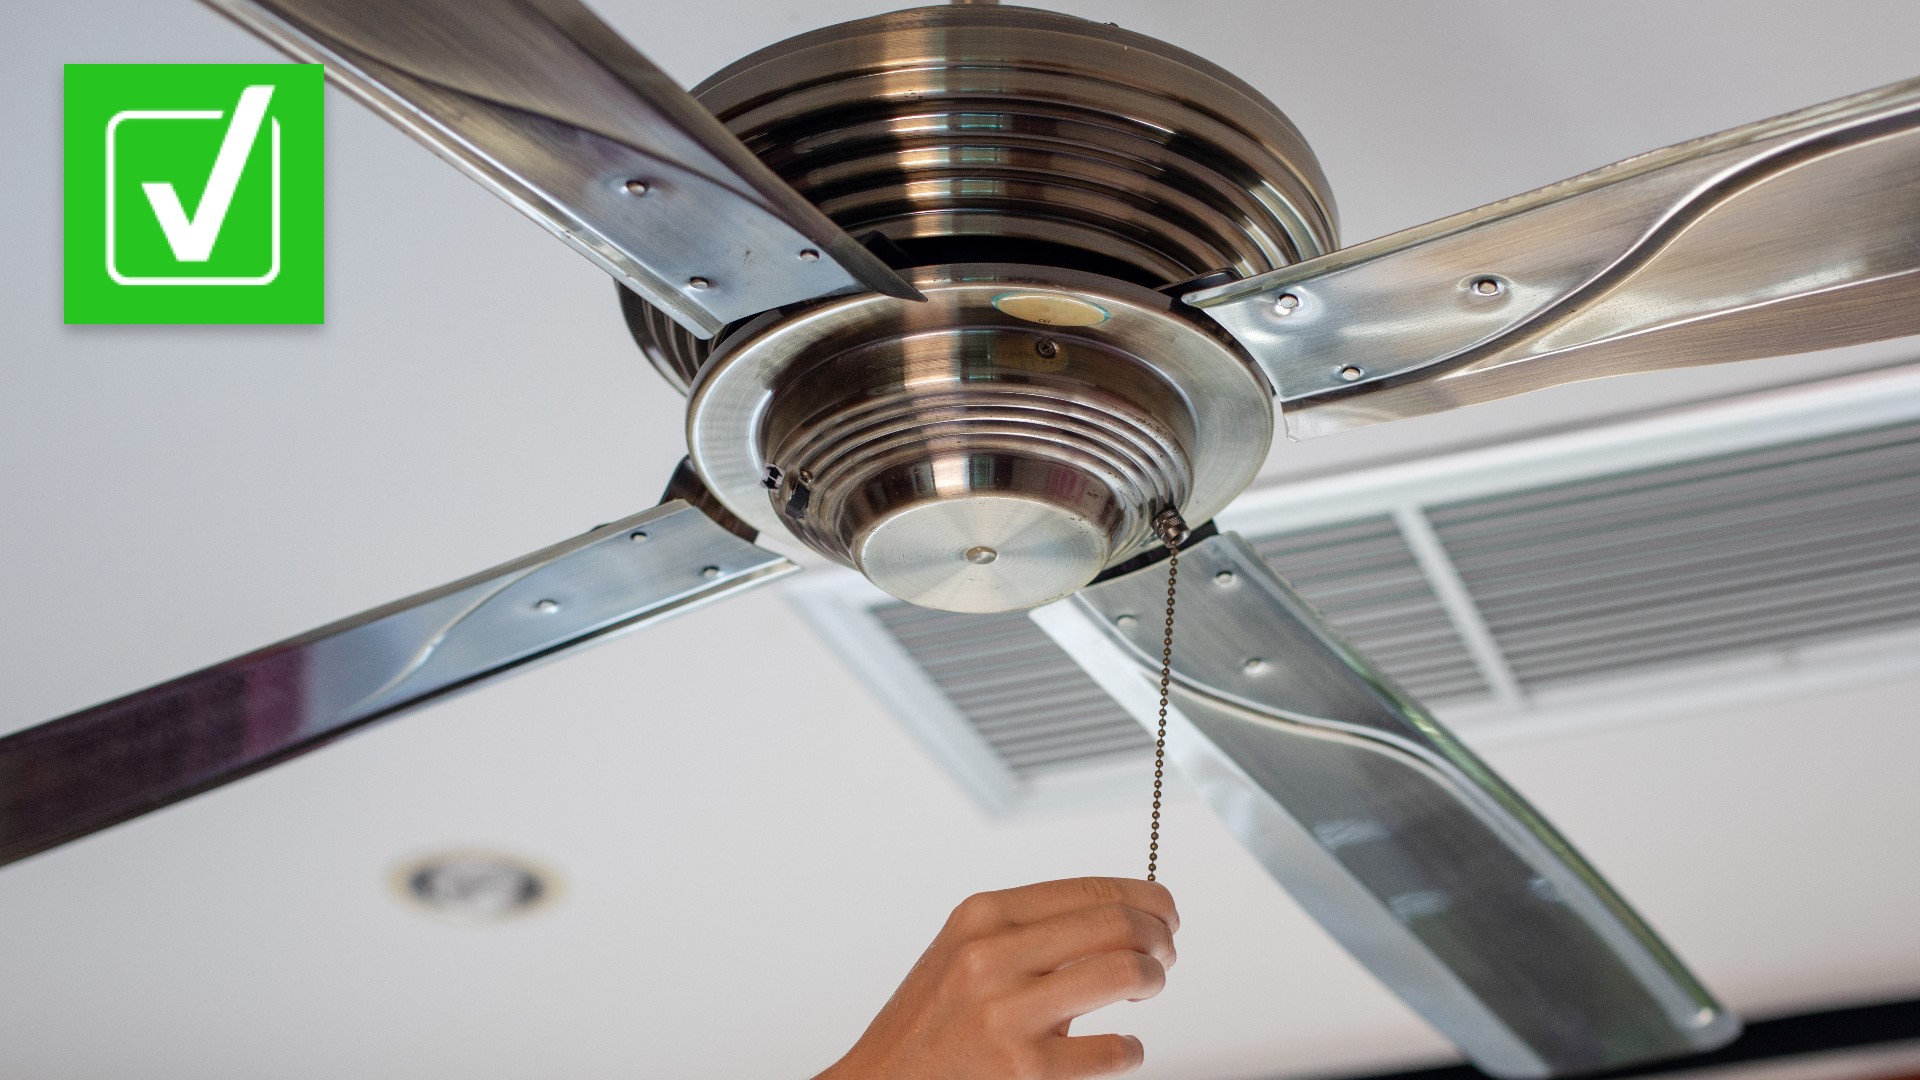 With summer in full swing, spinning your ceiling fan in the right direction can help you feel cooler and potentially save you money.